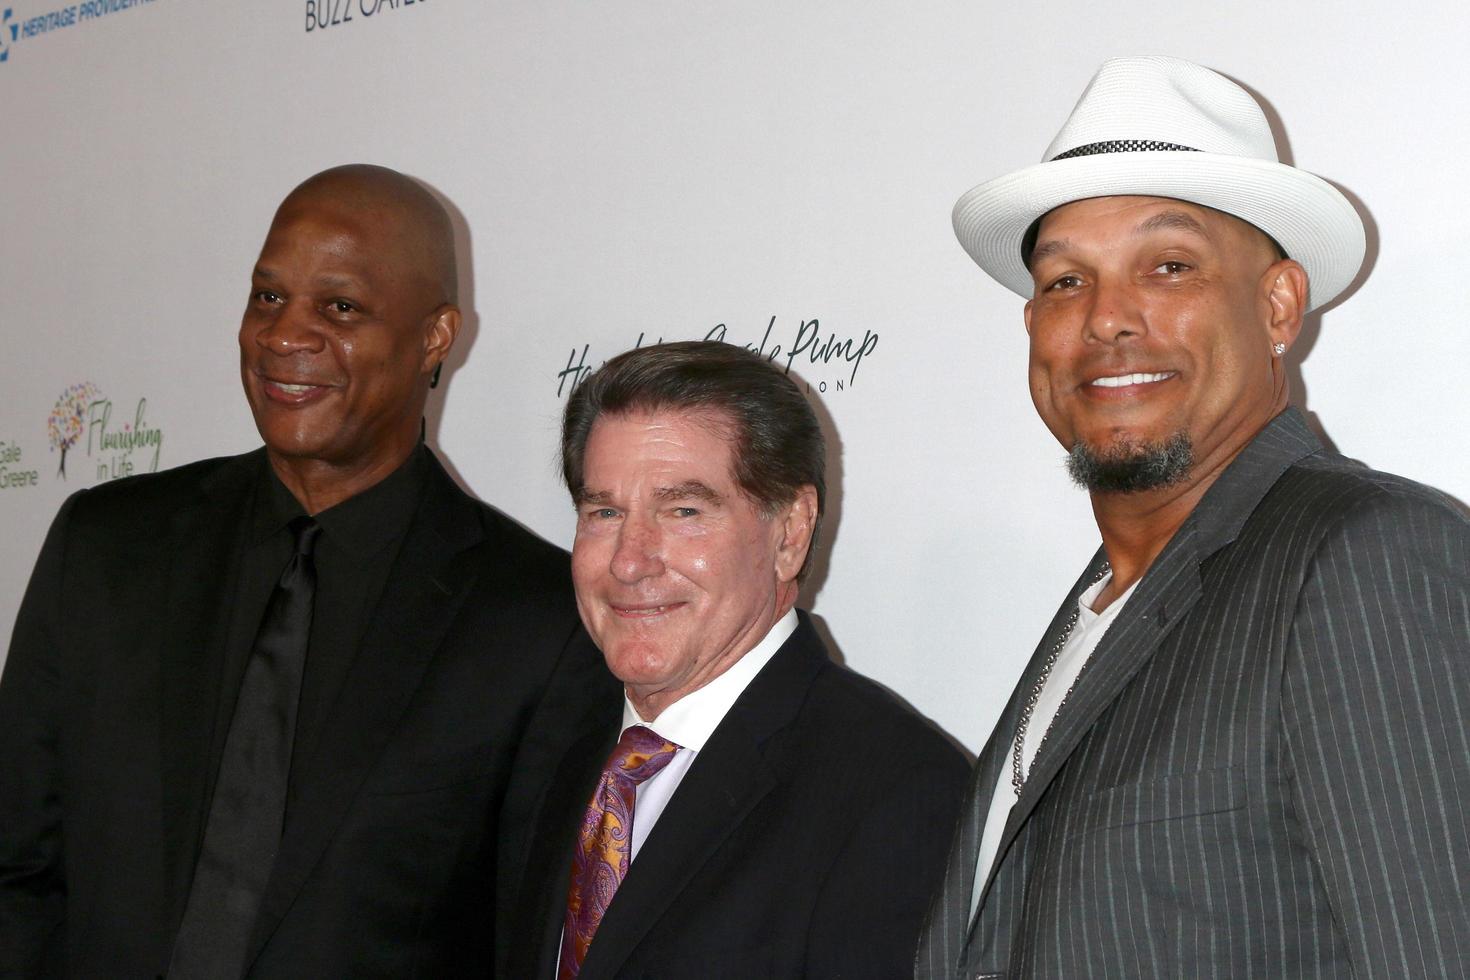 LOS ANGELES  AUG 20 - Darryl Strawberry, Steve Garvey, David Justice at the 21st Annual Harold and Carole Pump Foundation Gala at the Beverly Hilton Hotel on August 20, 2021 in Beverly Hills, CA photo